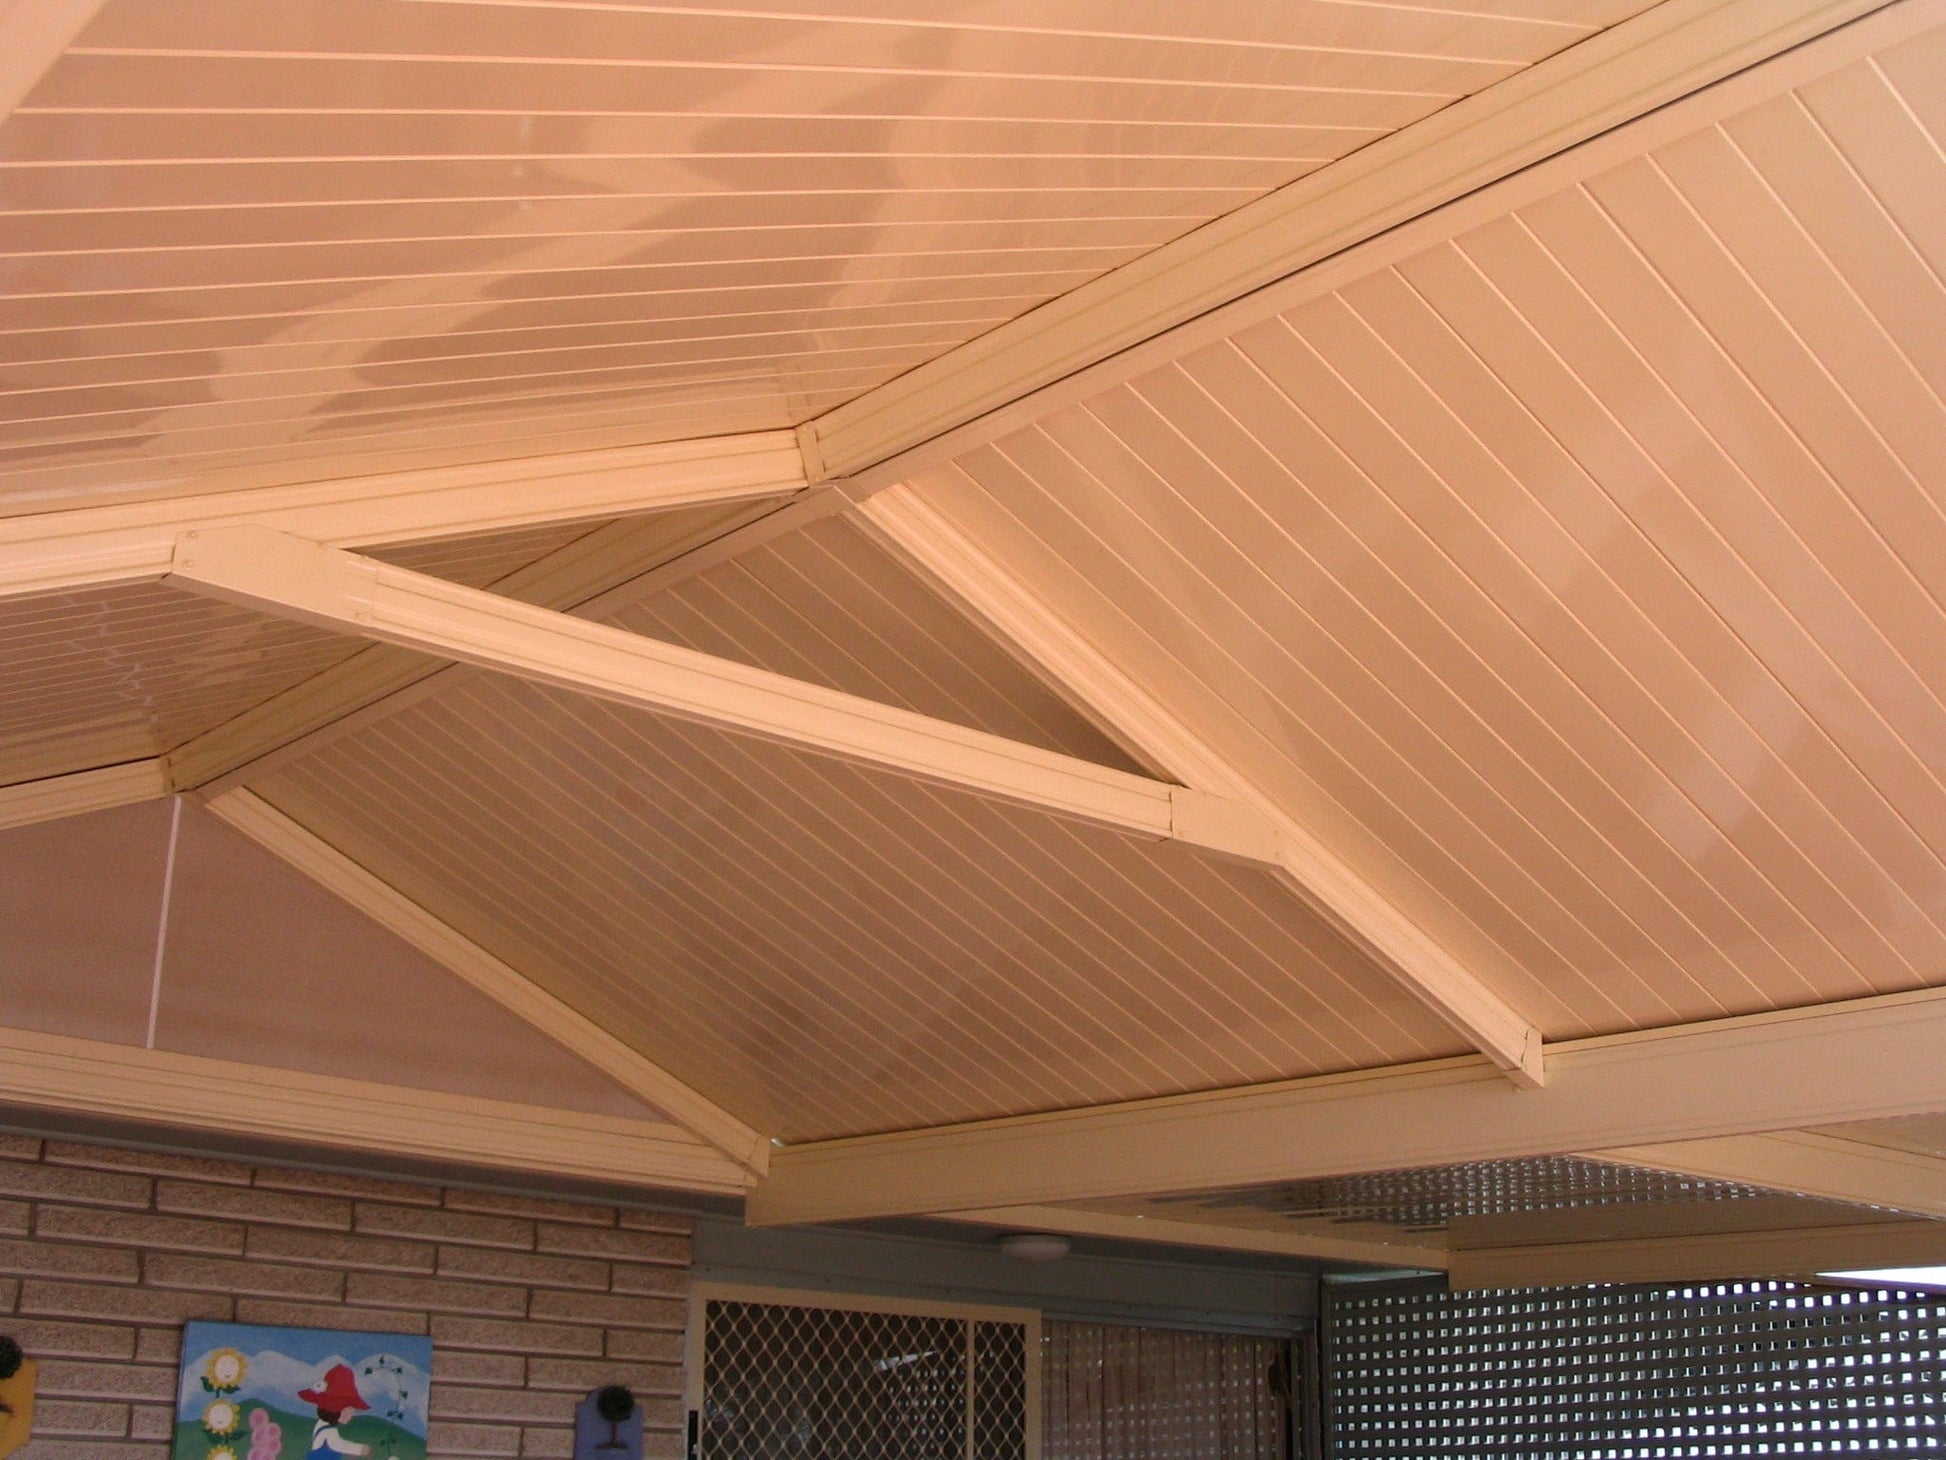 Insulated Gable Patio - 10m x 6m- Supply & Install QHI National